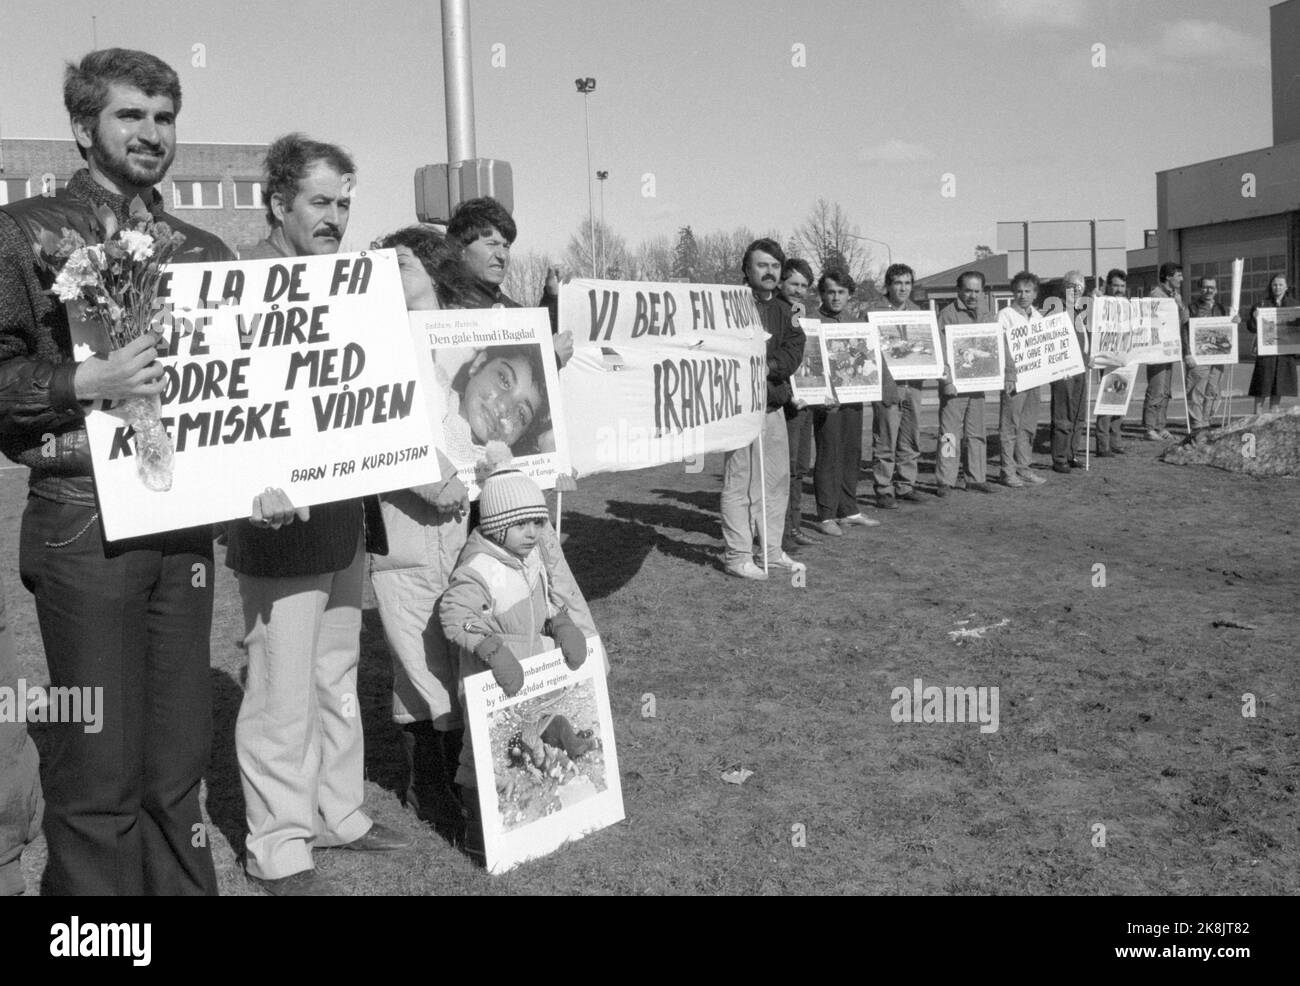 Oslo 19880408: The joint campaign against genocide in Kurdistan, with members from various Kurdish organizations in Norway, then demonstrates gas -injured Kurds arriving at Oslo Airport Fornebu on April 8, 1988. Iraqi President Saddam Hussein allowed the use of chemical weapons against civilians in several villages, and many A thousand people were killed. Photo: Bjørn Sigurdsøn Stock Photo